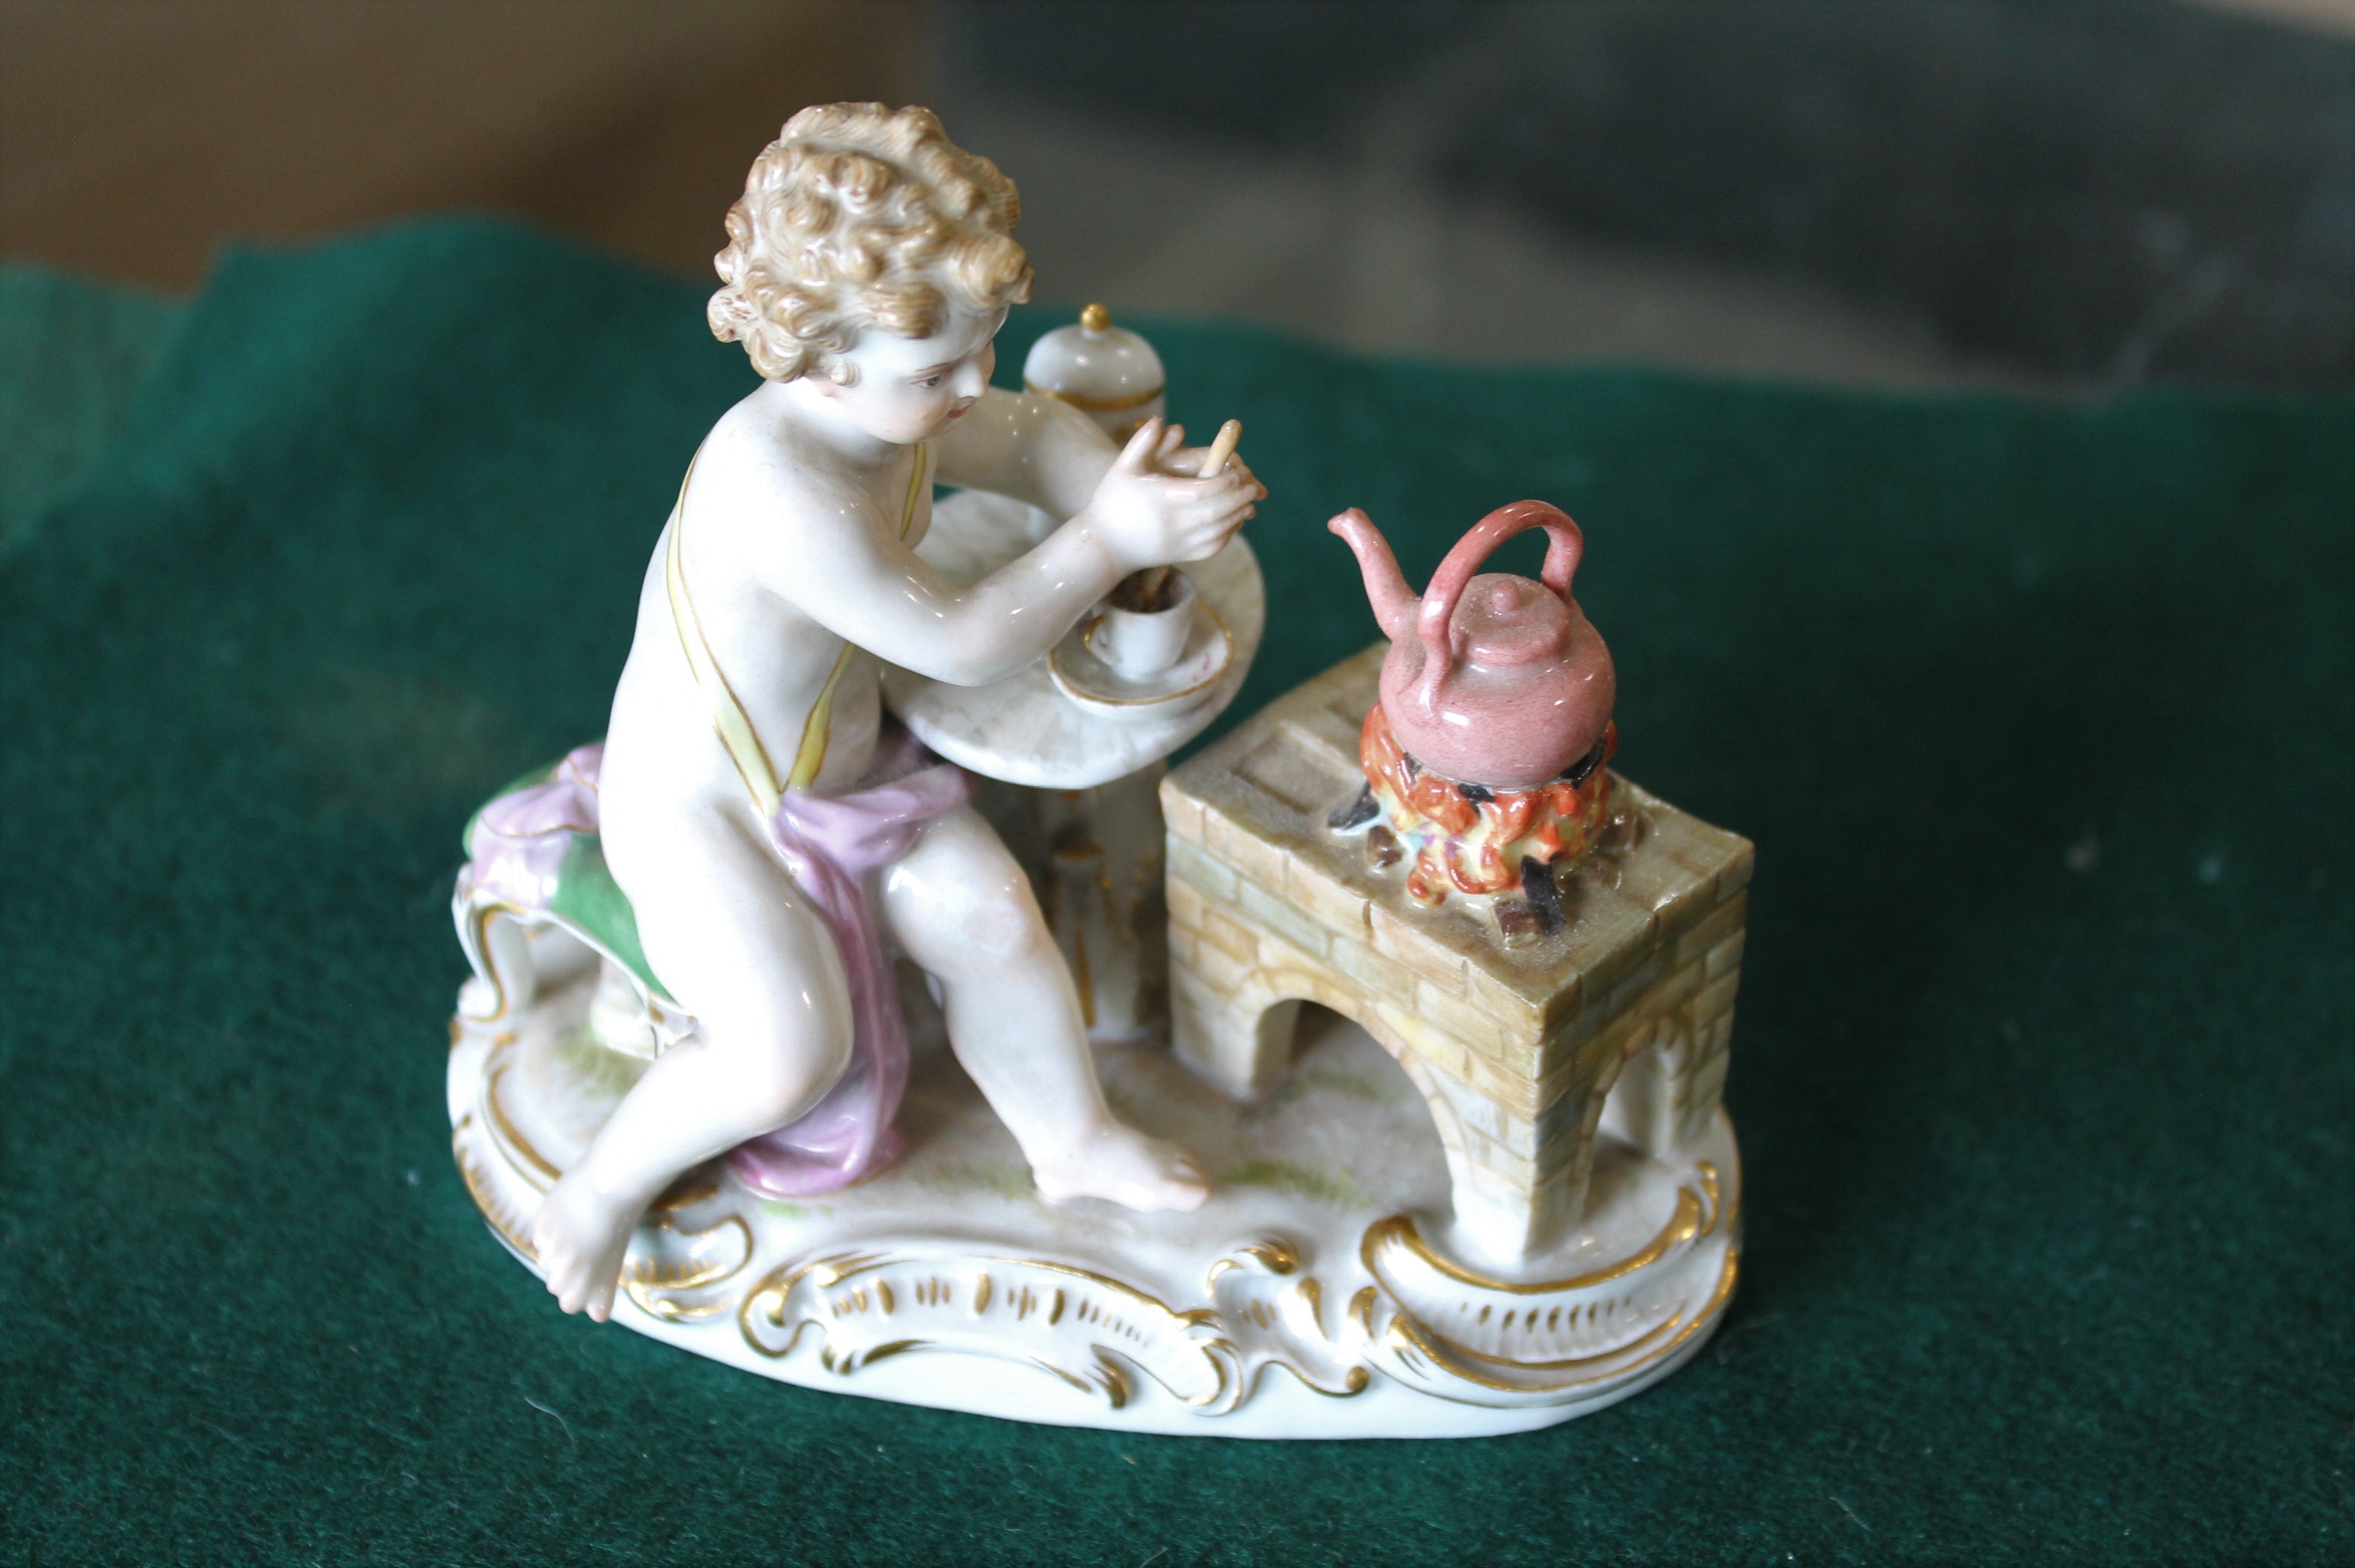 MEISSEN FIGURE a porcelain figure of a cherub mixing a drink, with a brazier and a kettle on a fire, - Image 7 of 13